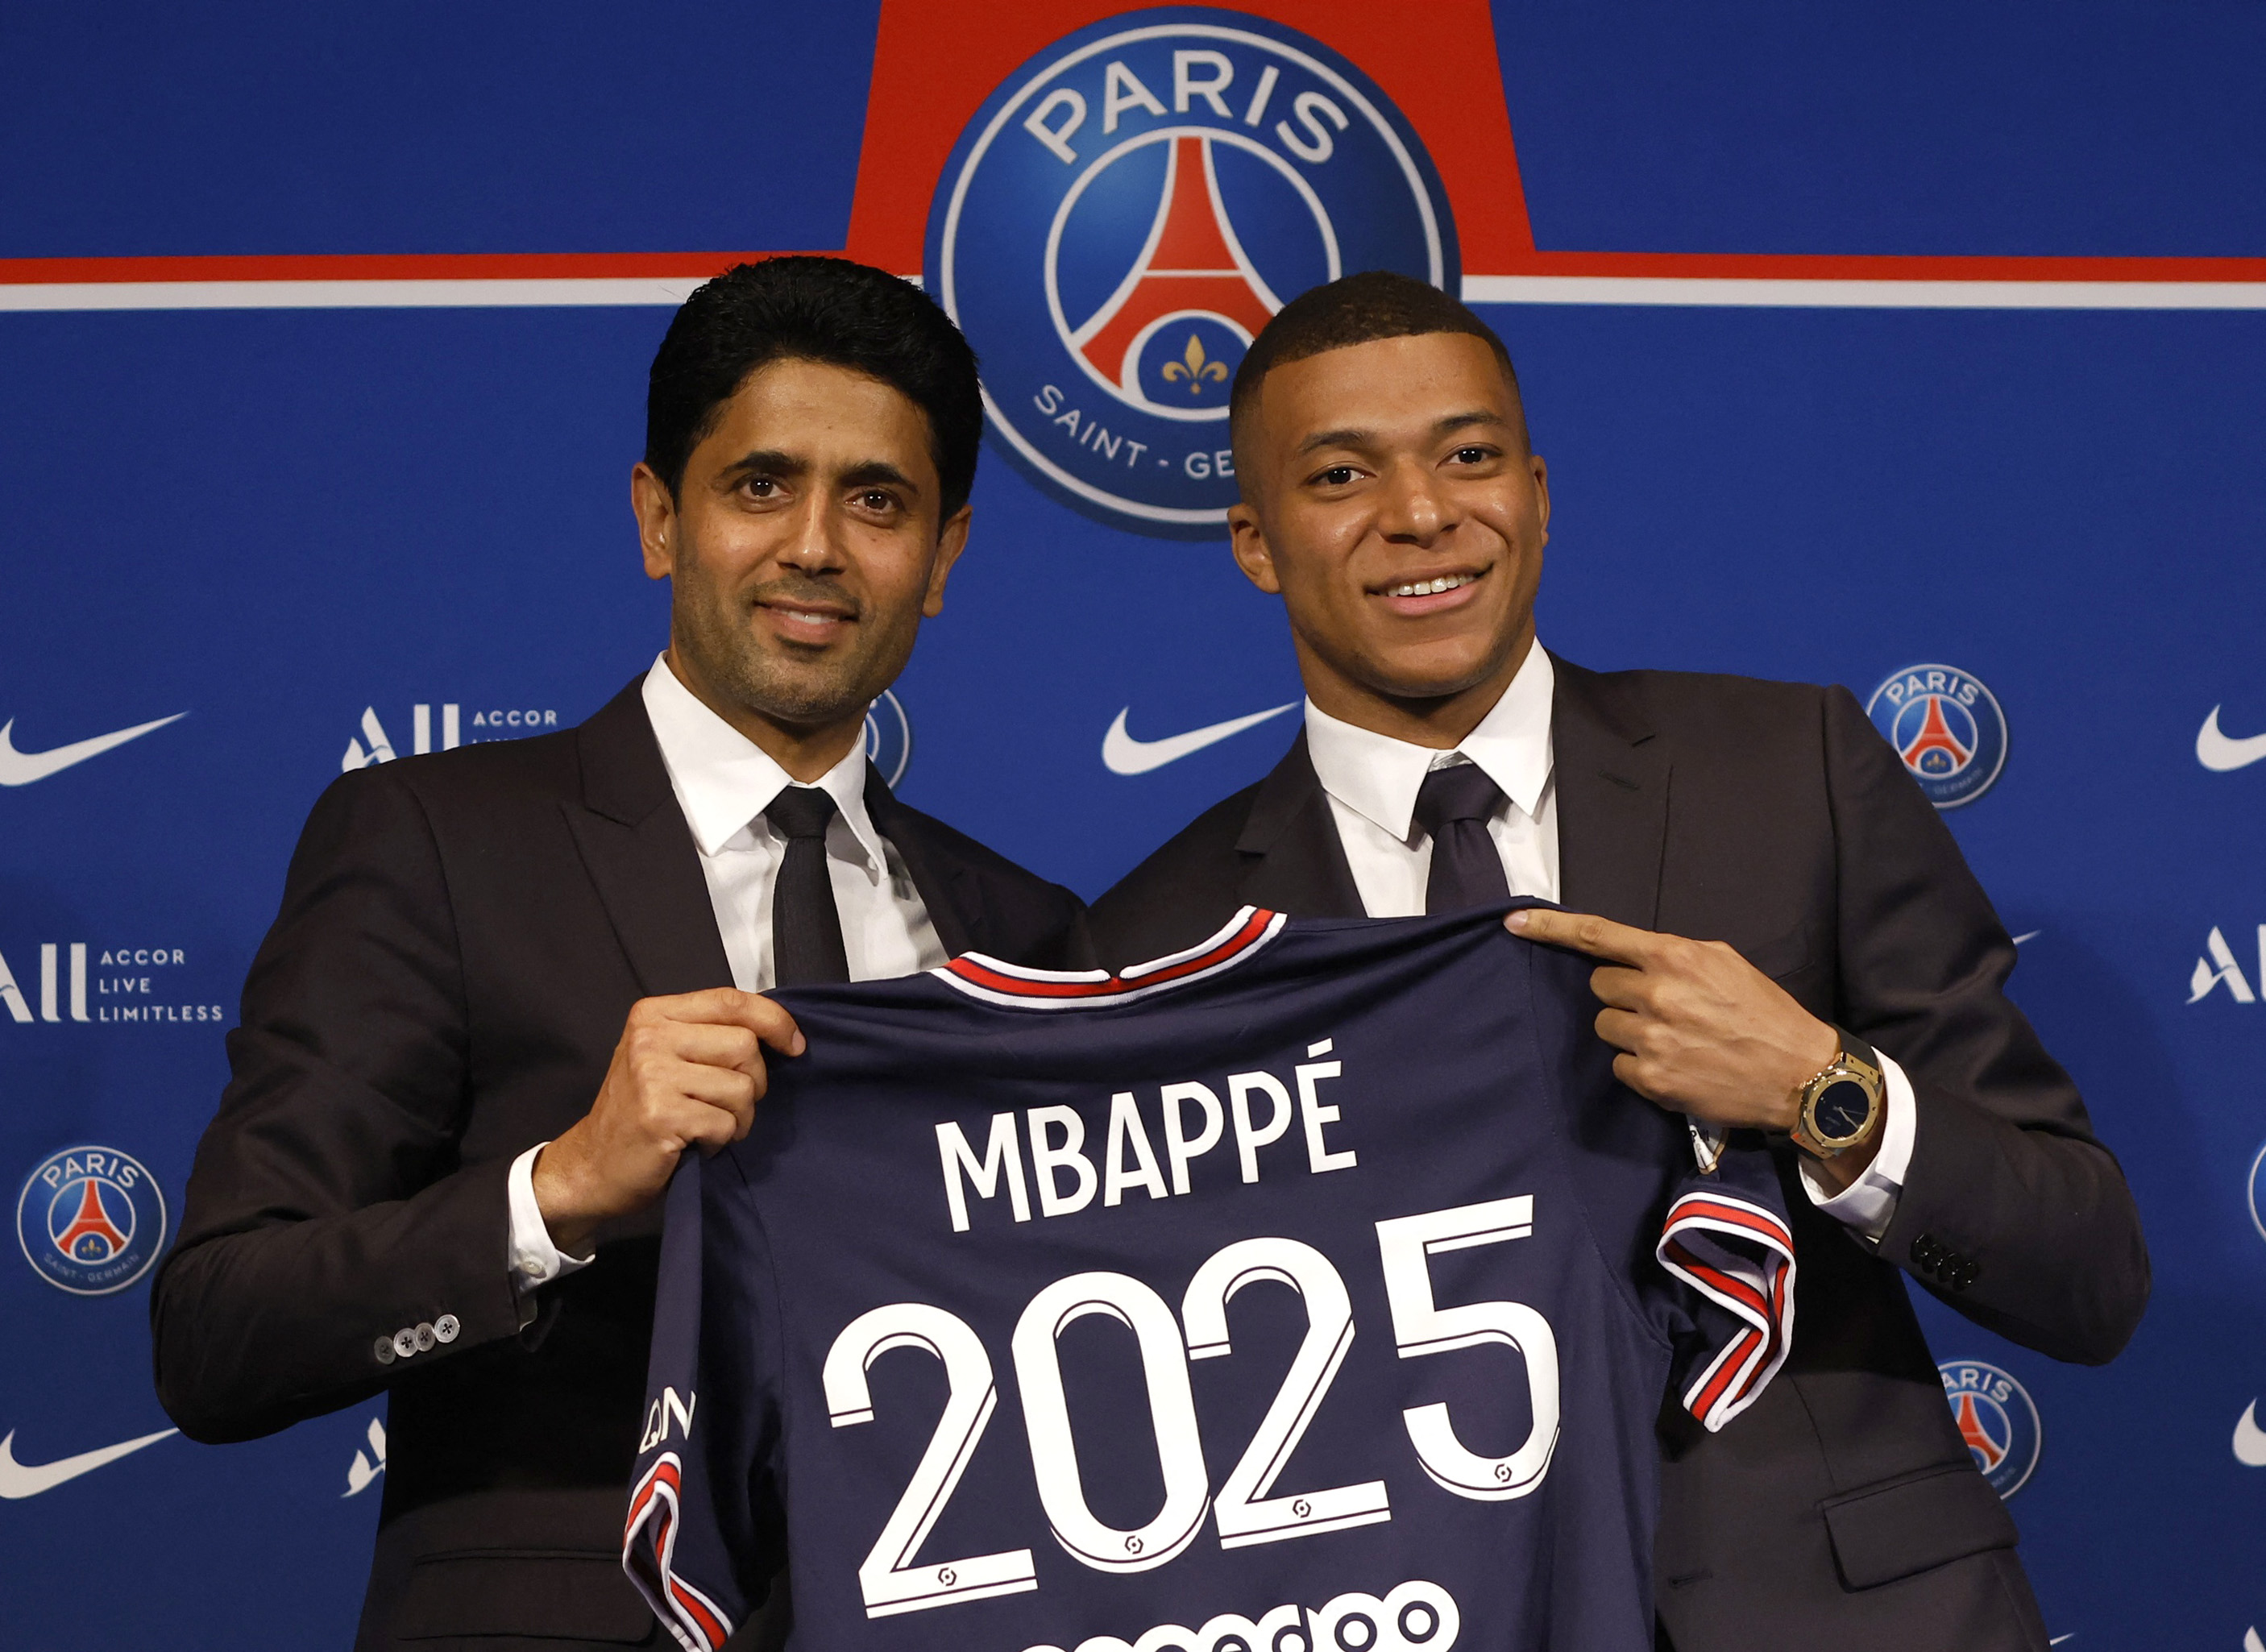 Mbappé signed until 2025 in his last contract renewal (Reuters)